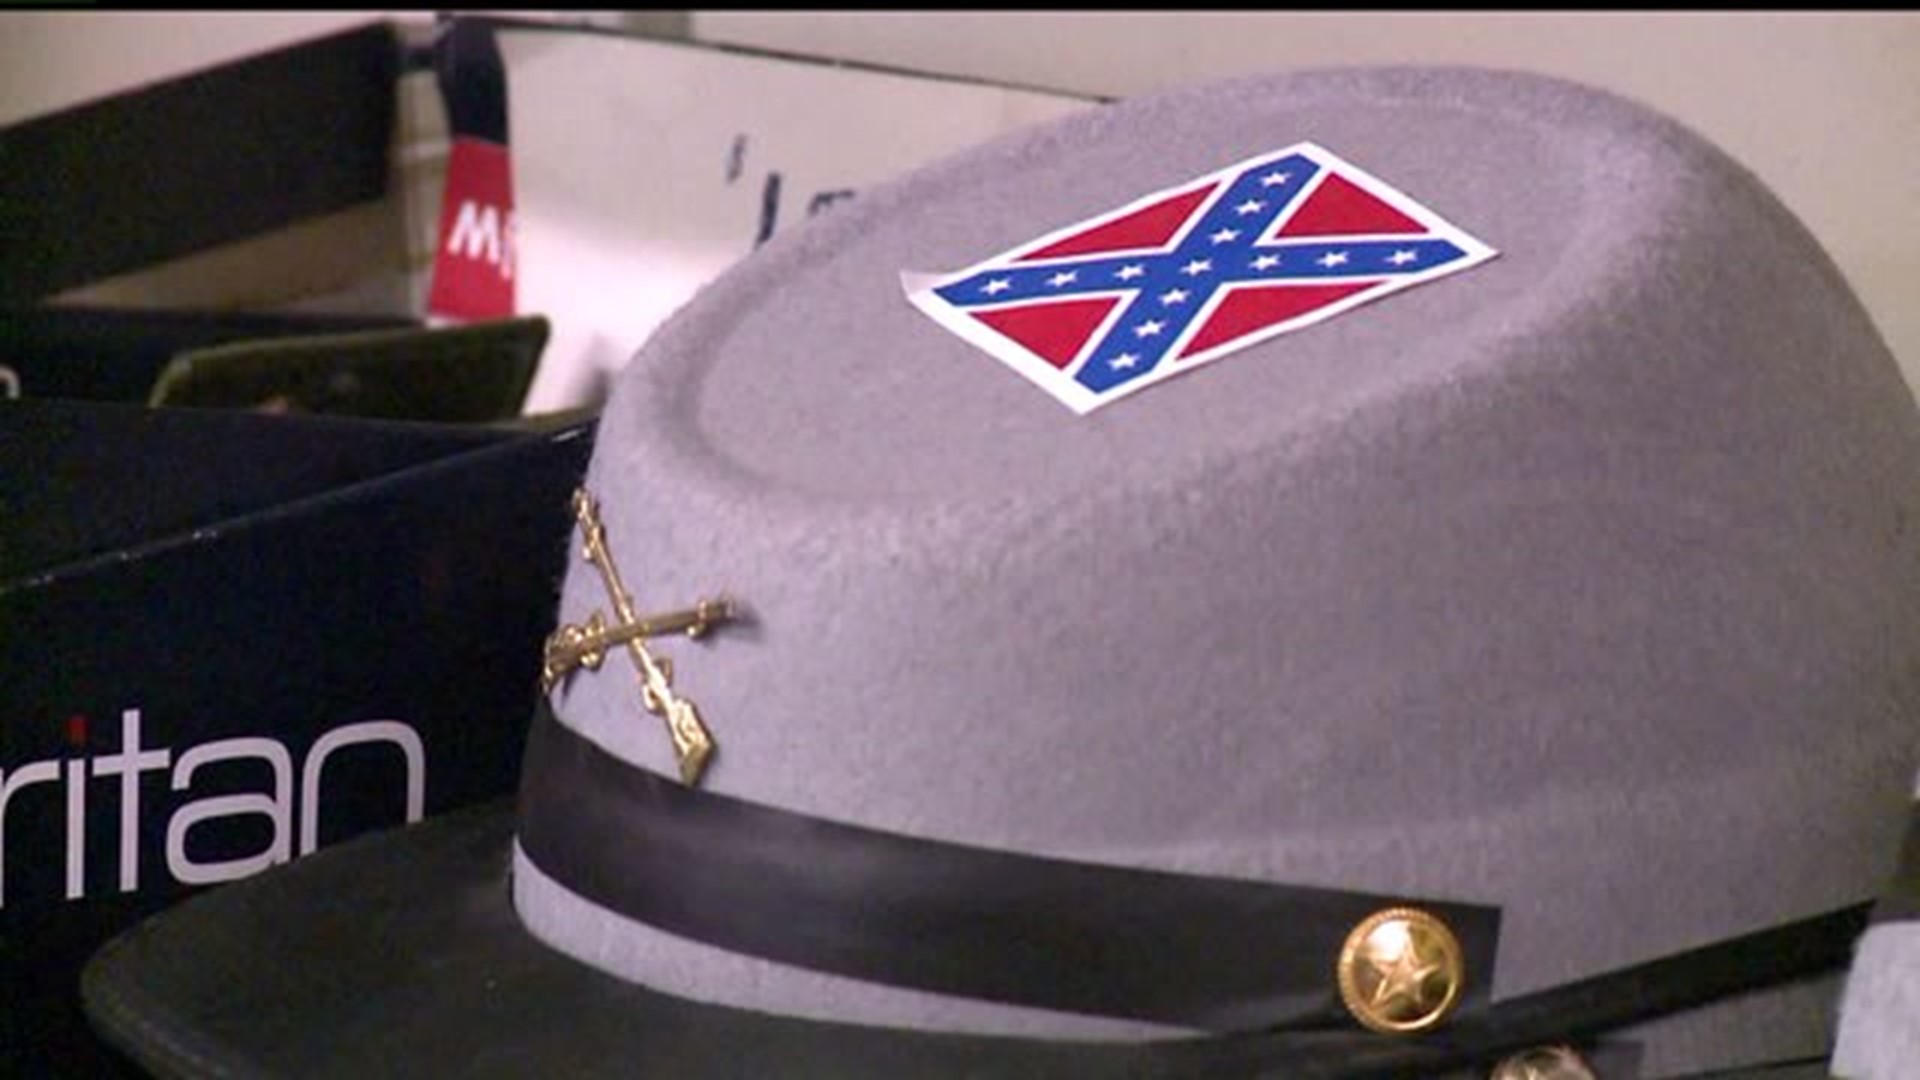 Local reaction to Confederate flag controversy